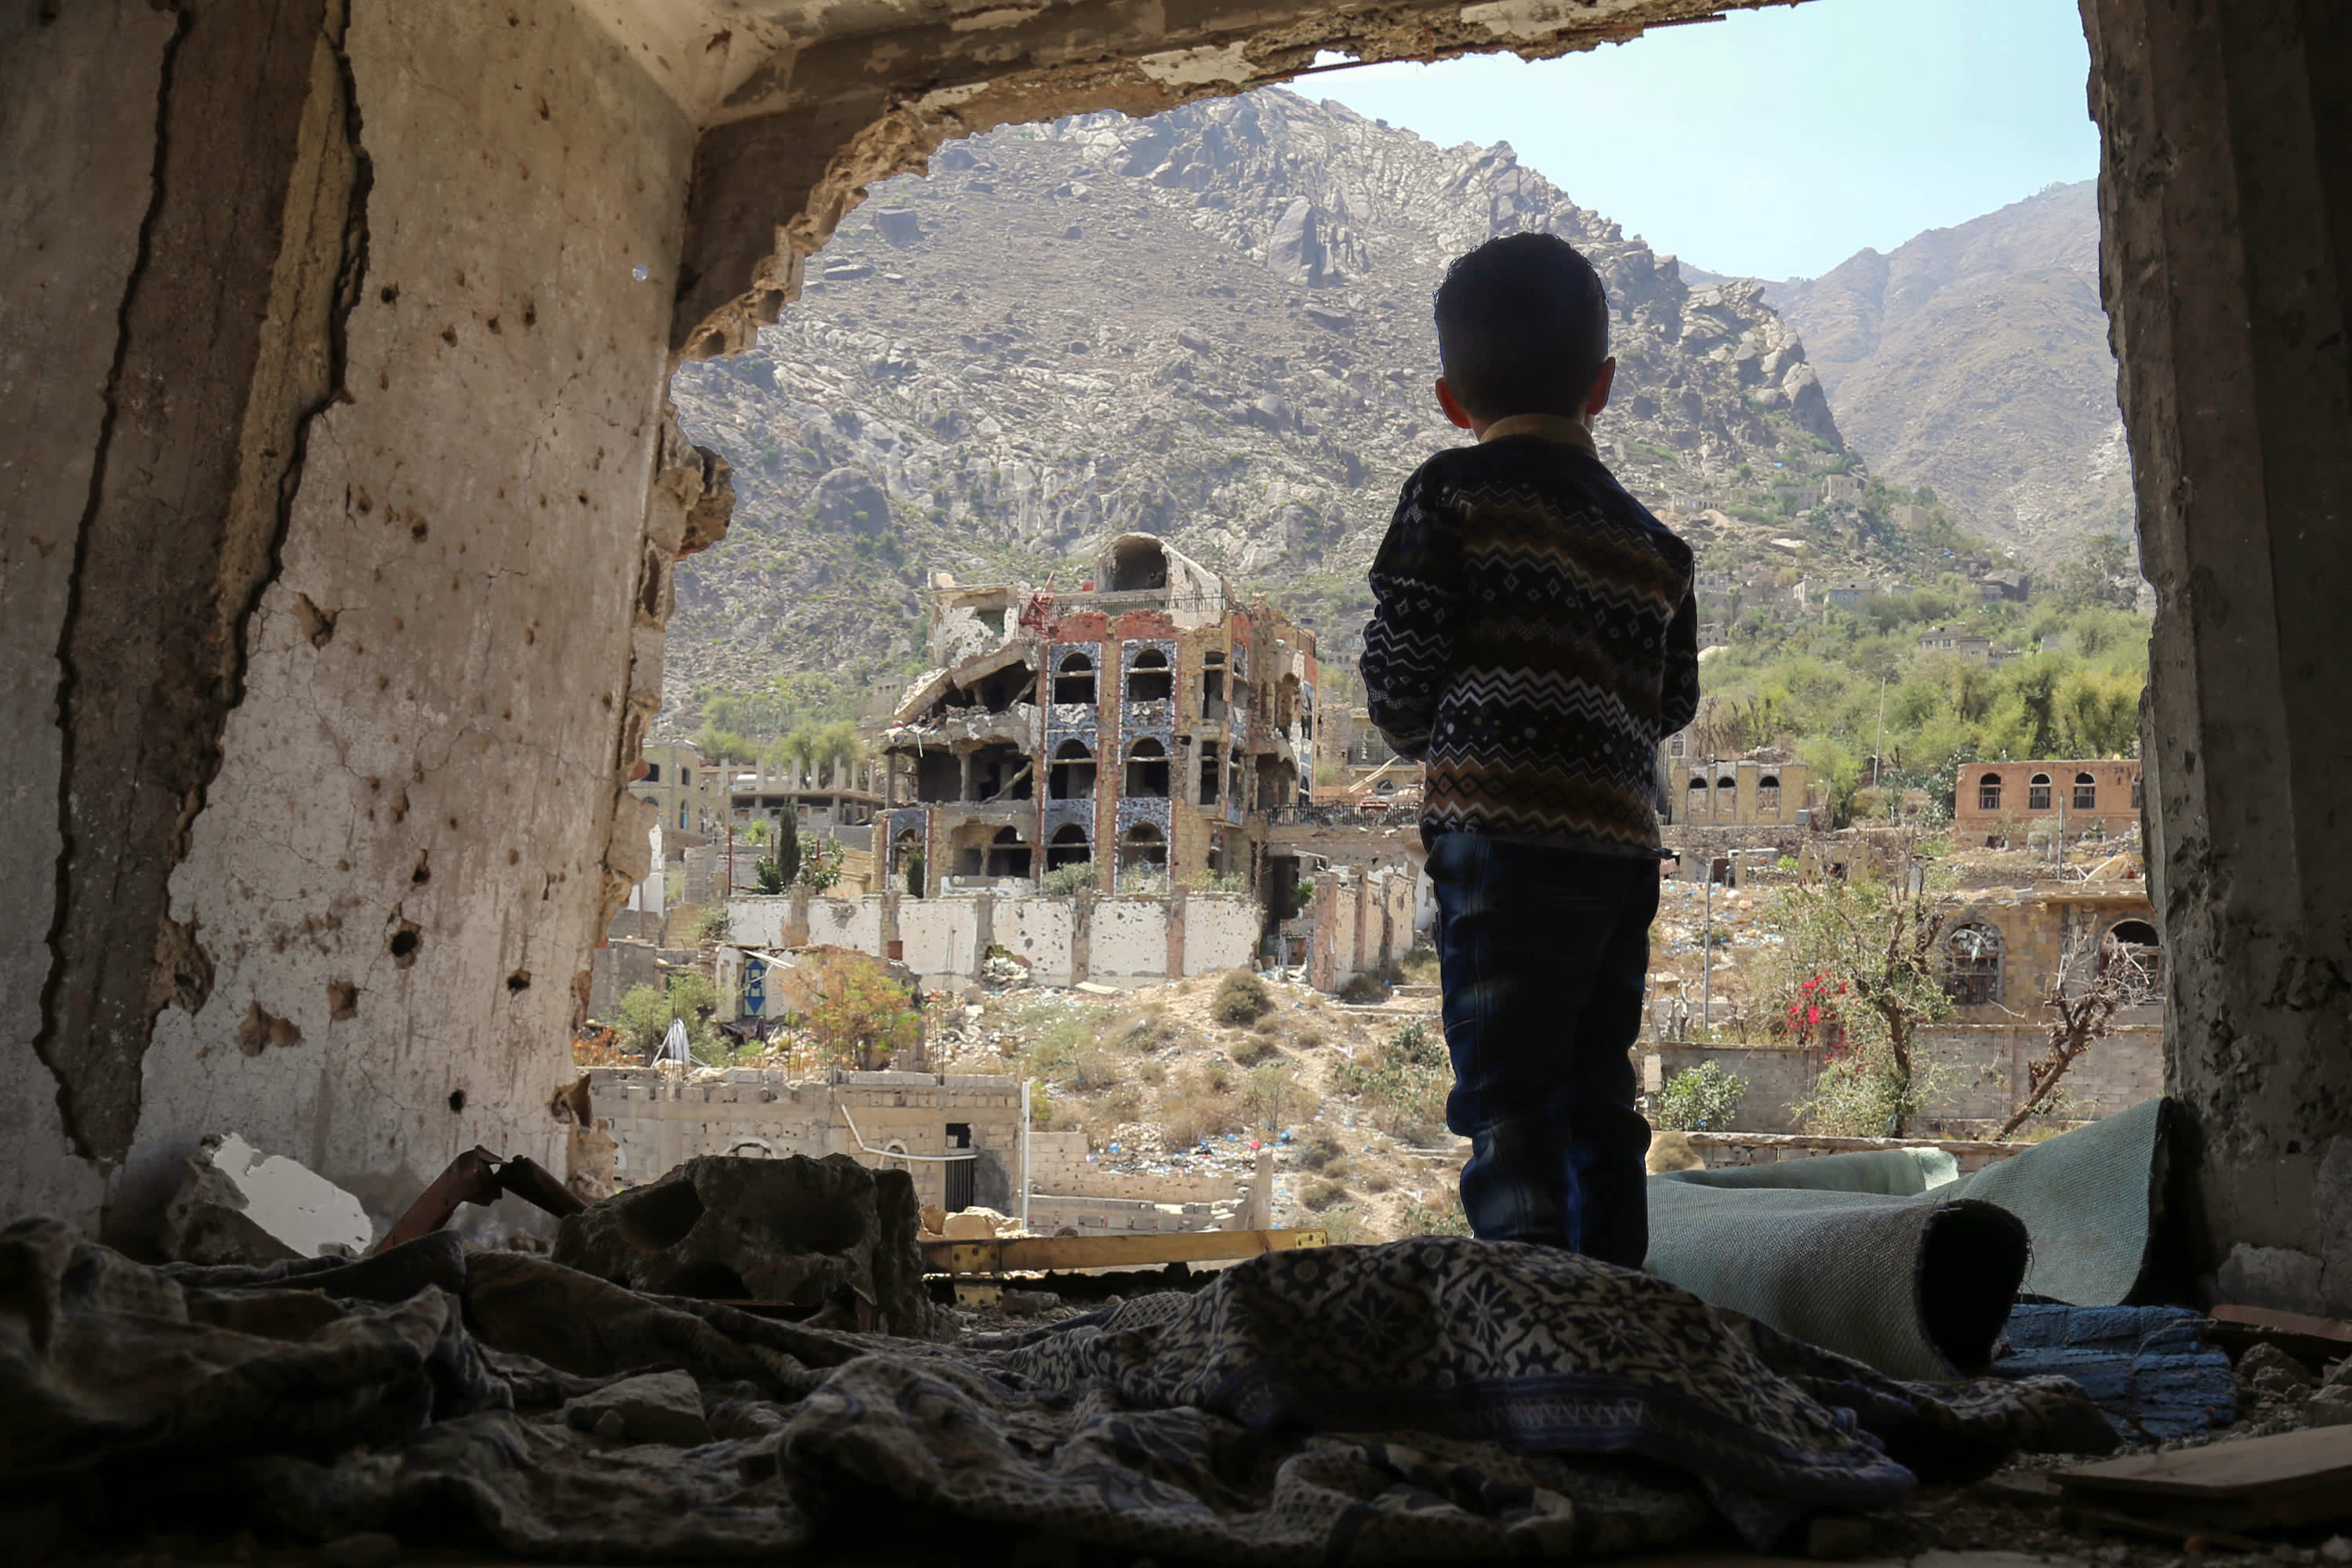 Saudi Arabia is proposing a ceasefire in Yemen as the war continues